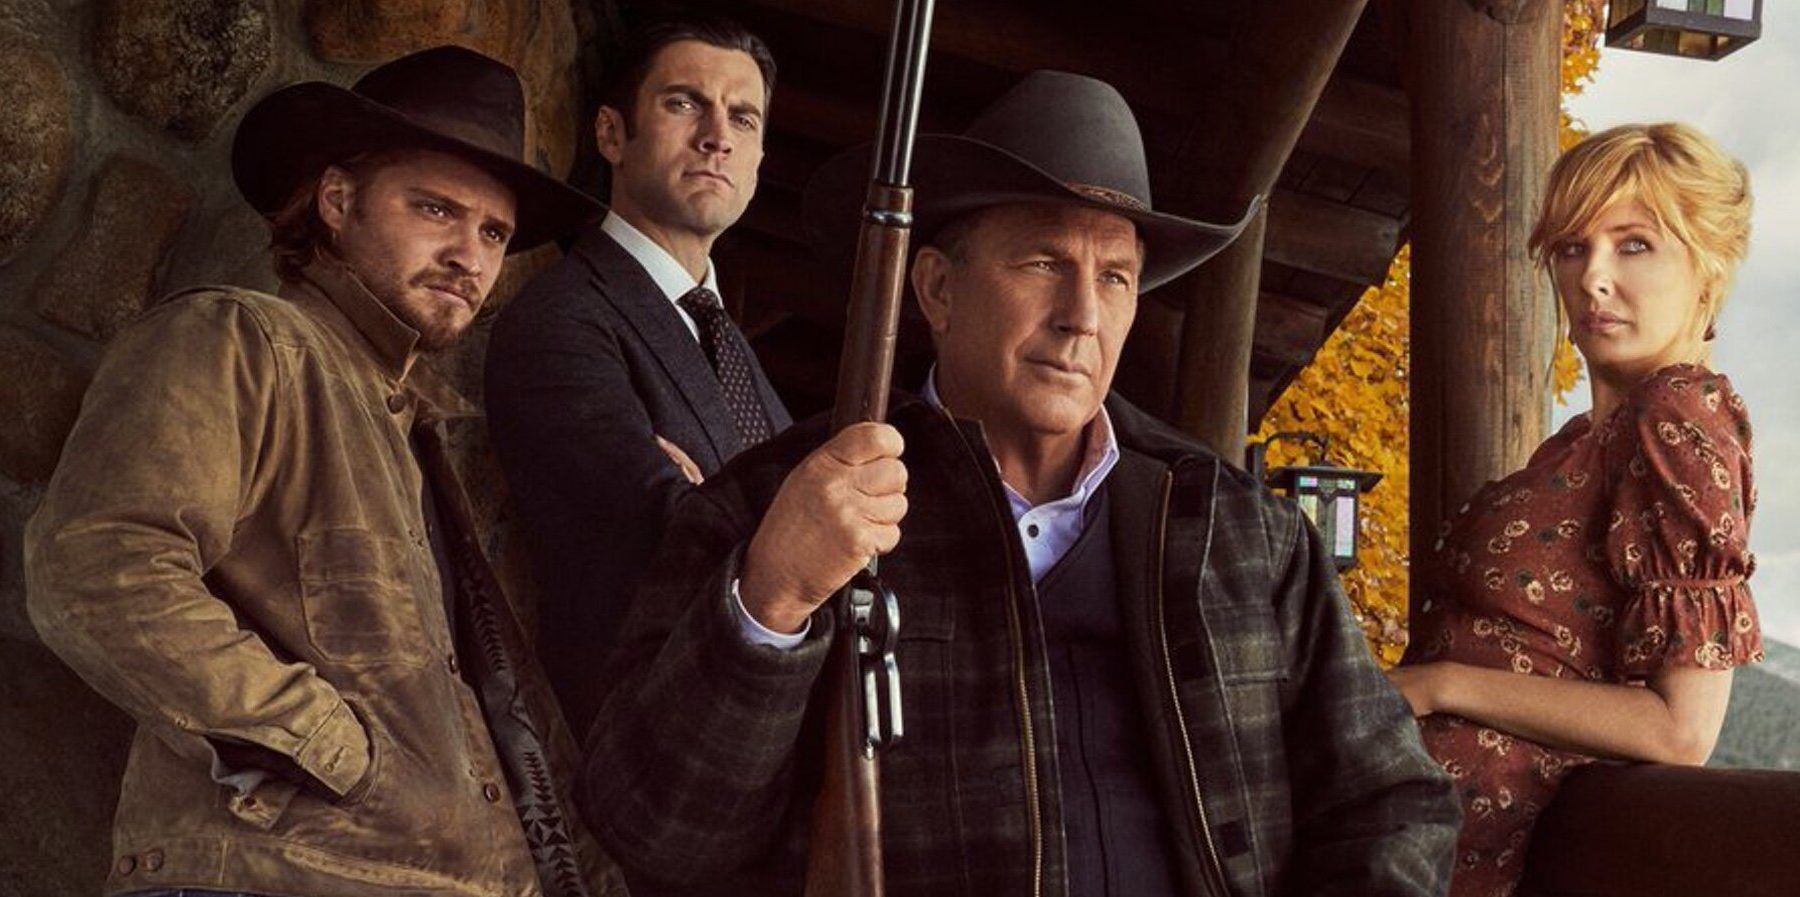 The 10 Best Episodes Of Yellowstone, According To IMDb